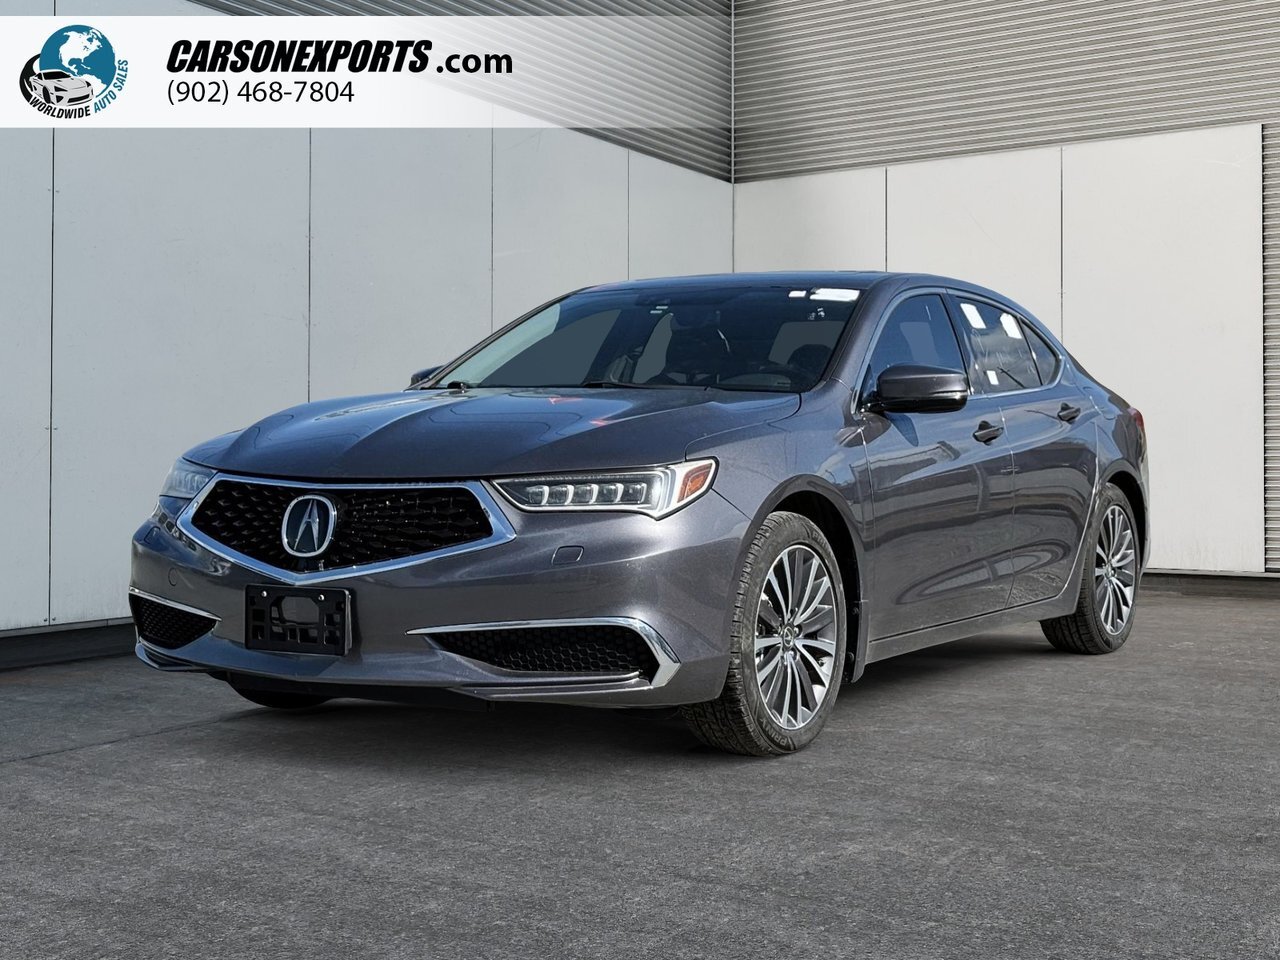 2018 Acura TLX 3.5L V6 The best place to buy a used car. Period.